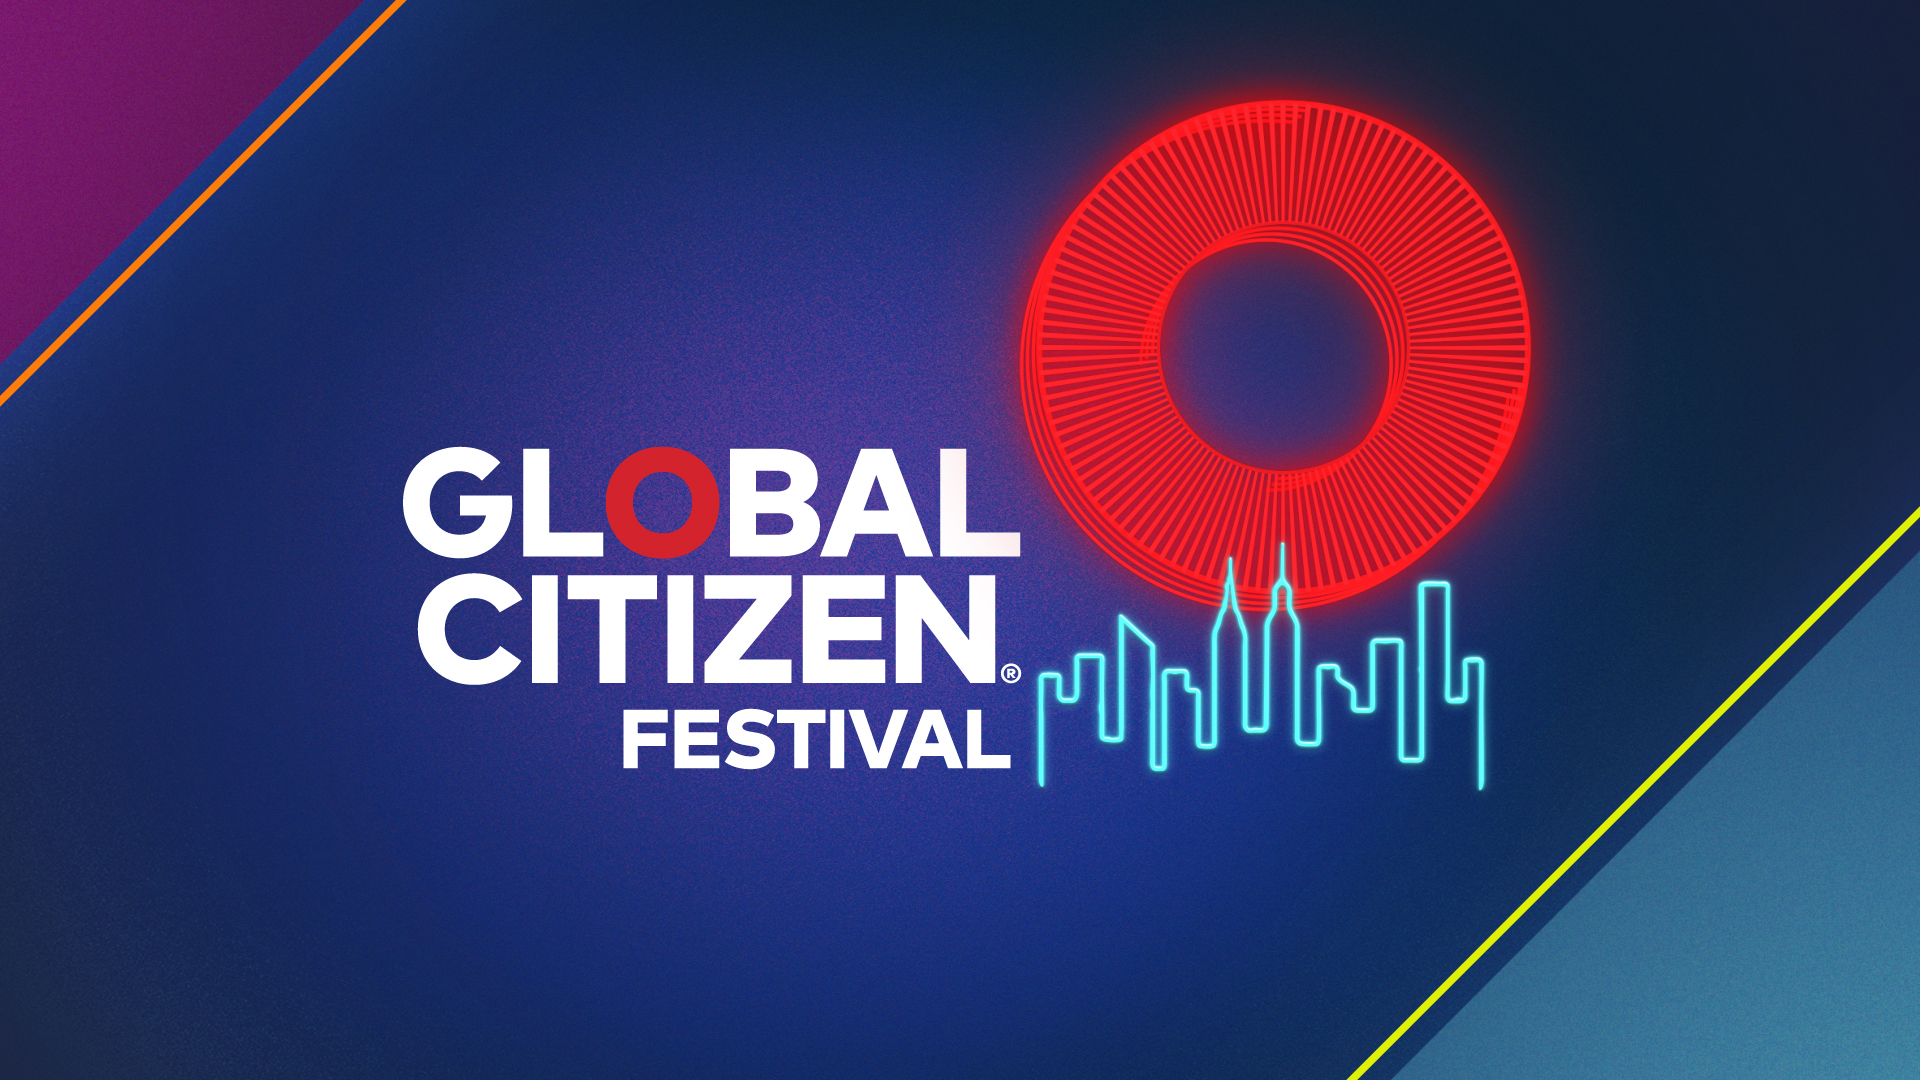 How to watch the 2019 Global Citizen Festival